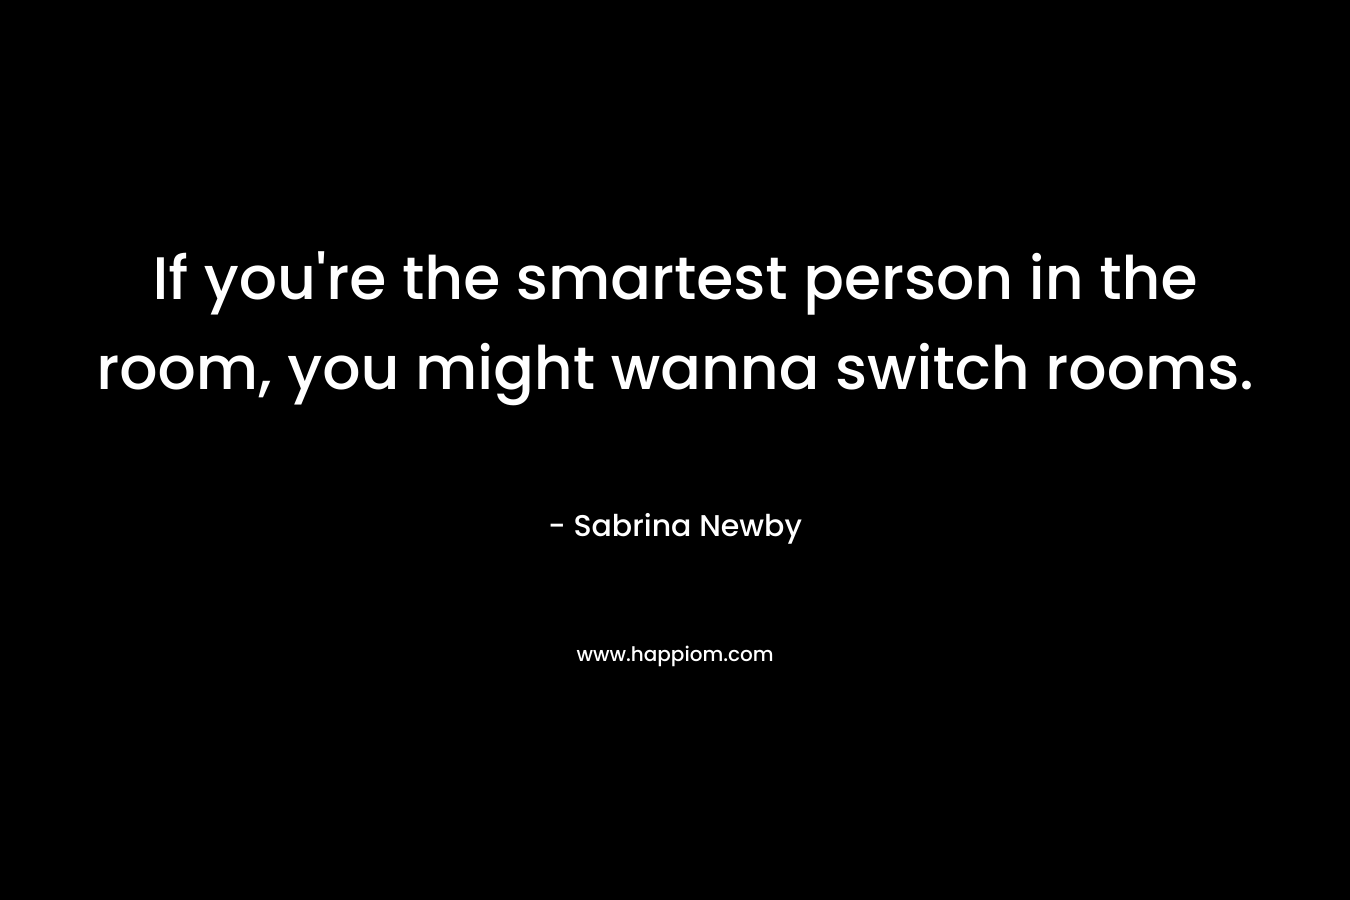 If you’re the smartest person in the room, you might wanna switch rooms. – Sabrina Newby